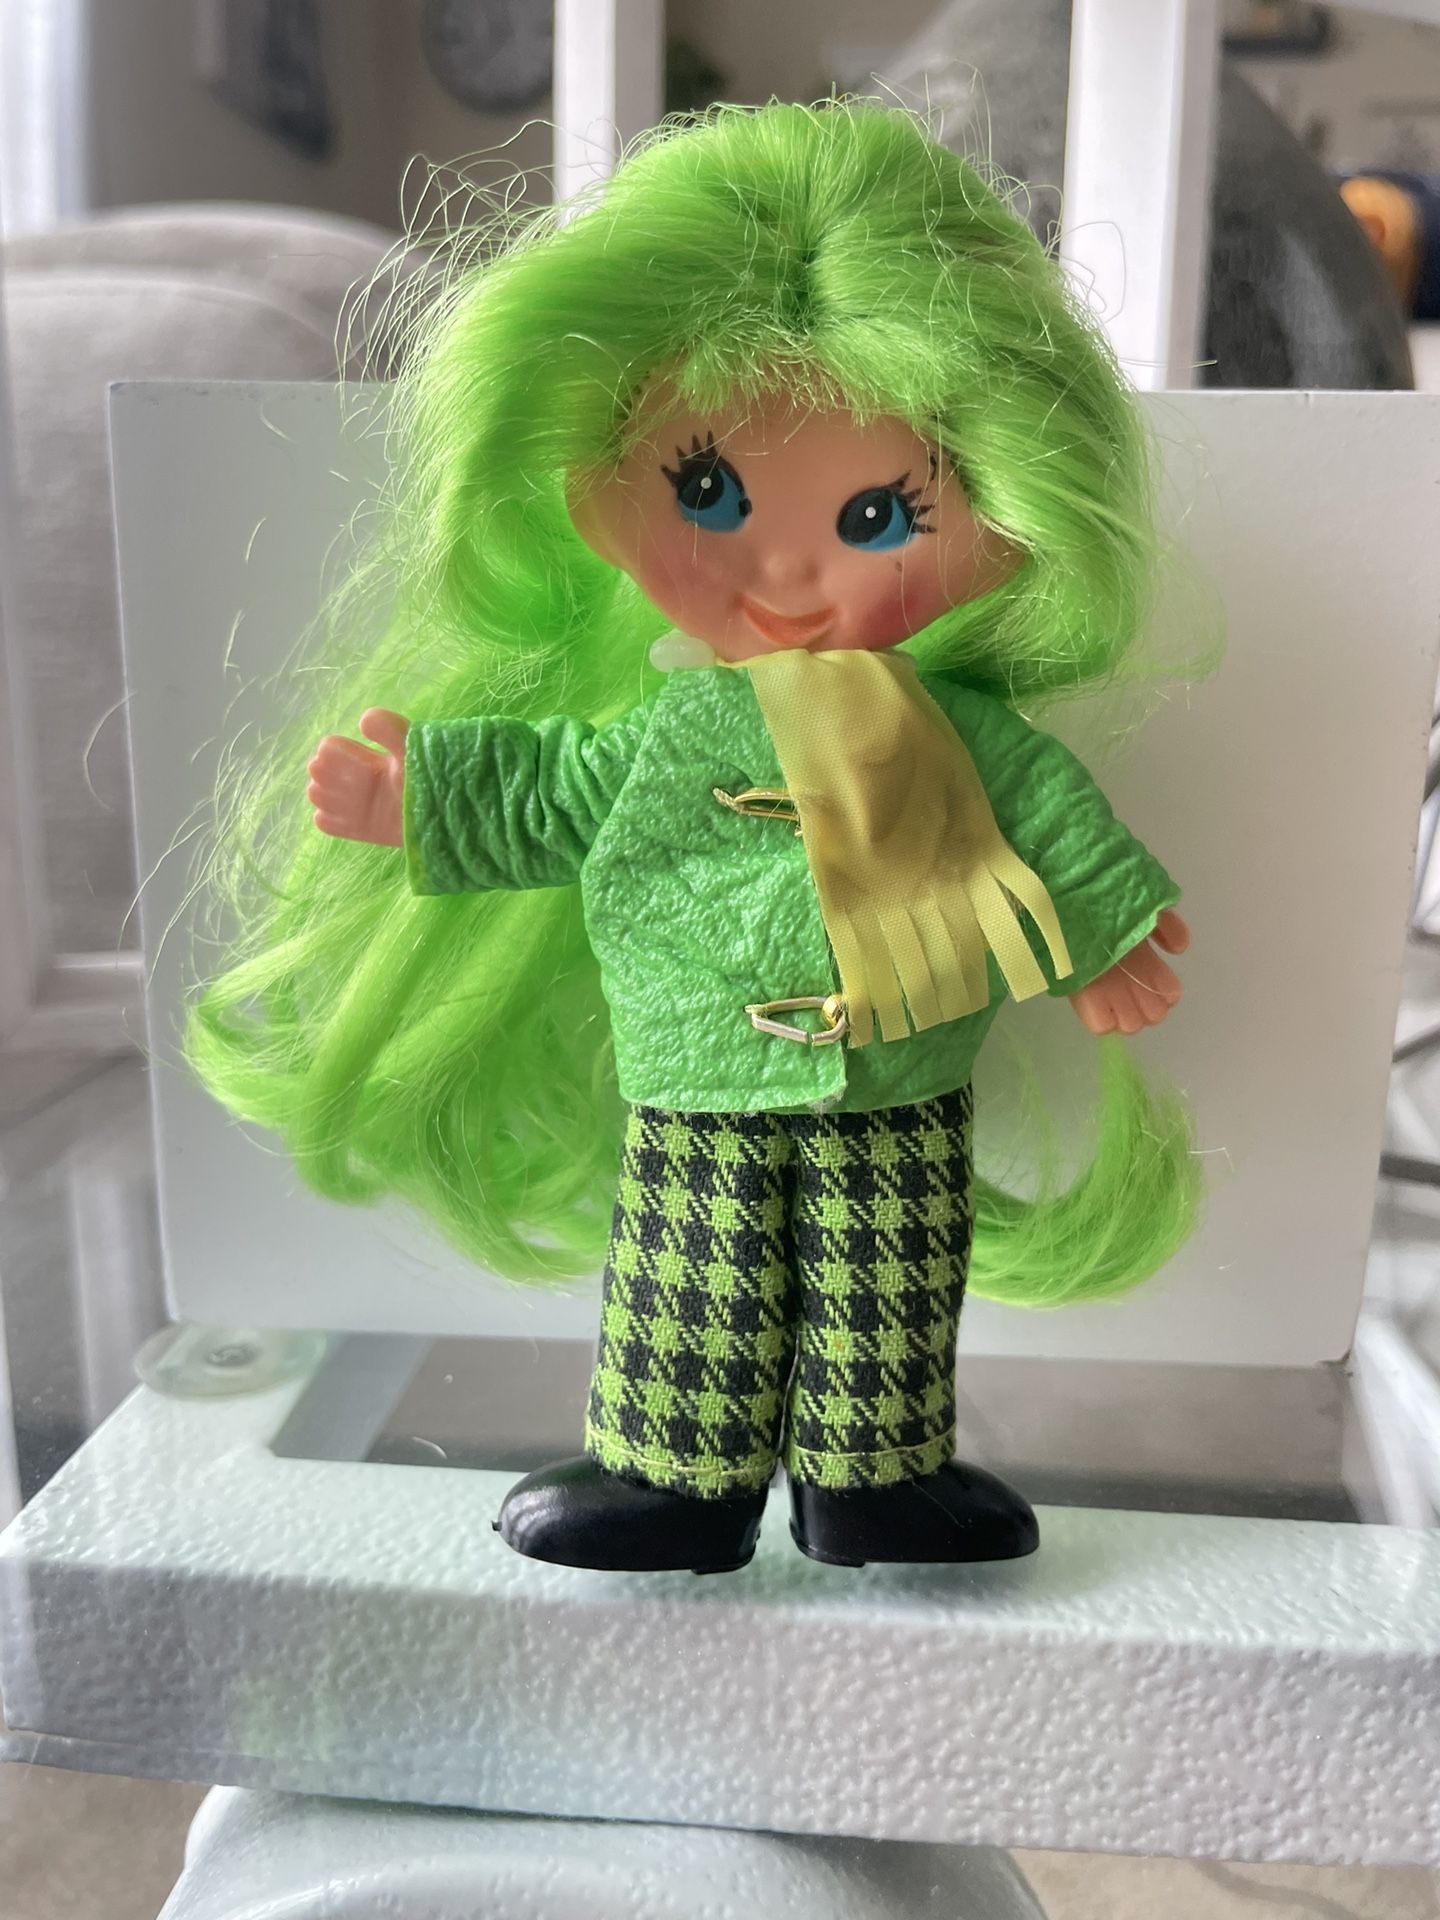 VINTAGE 1969 IDEAL TOY FLATSY DOLL DEWIE RALLY GREEN FLAT BENDABLE HONG KONG